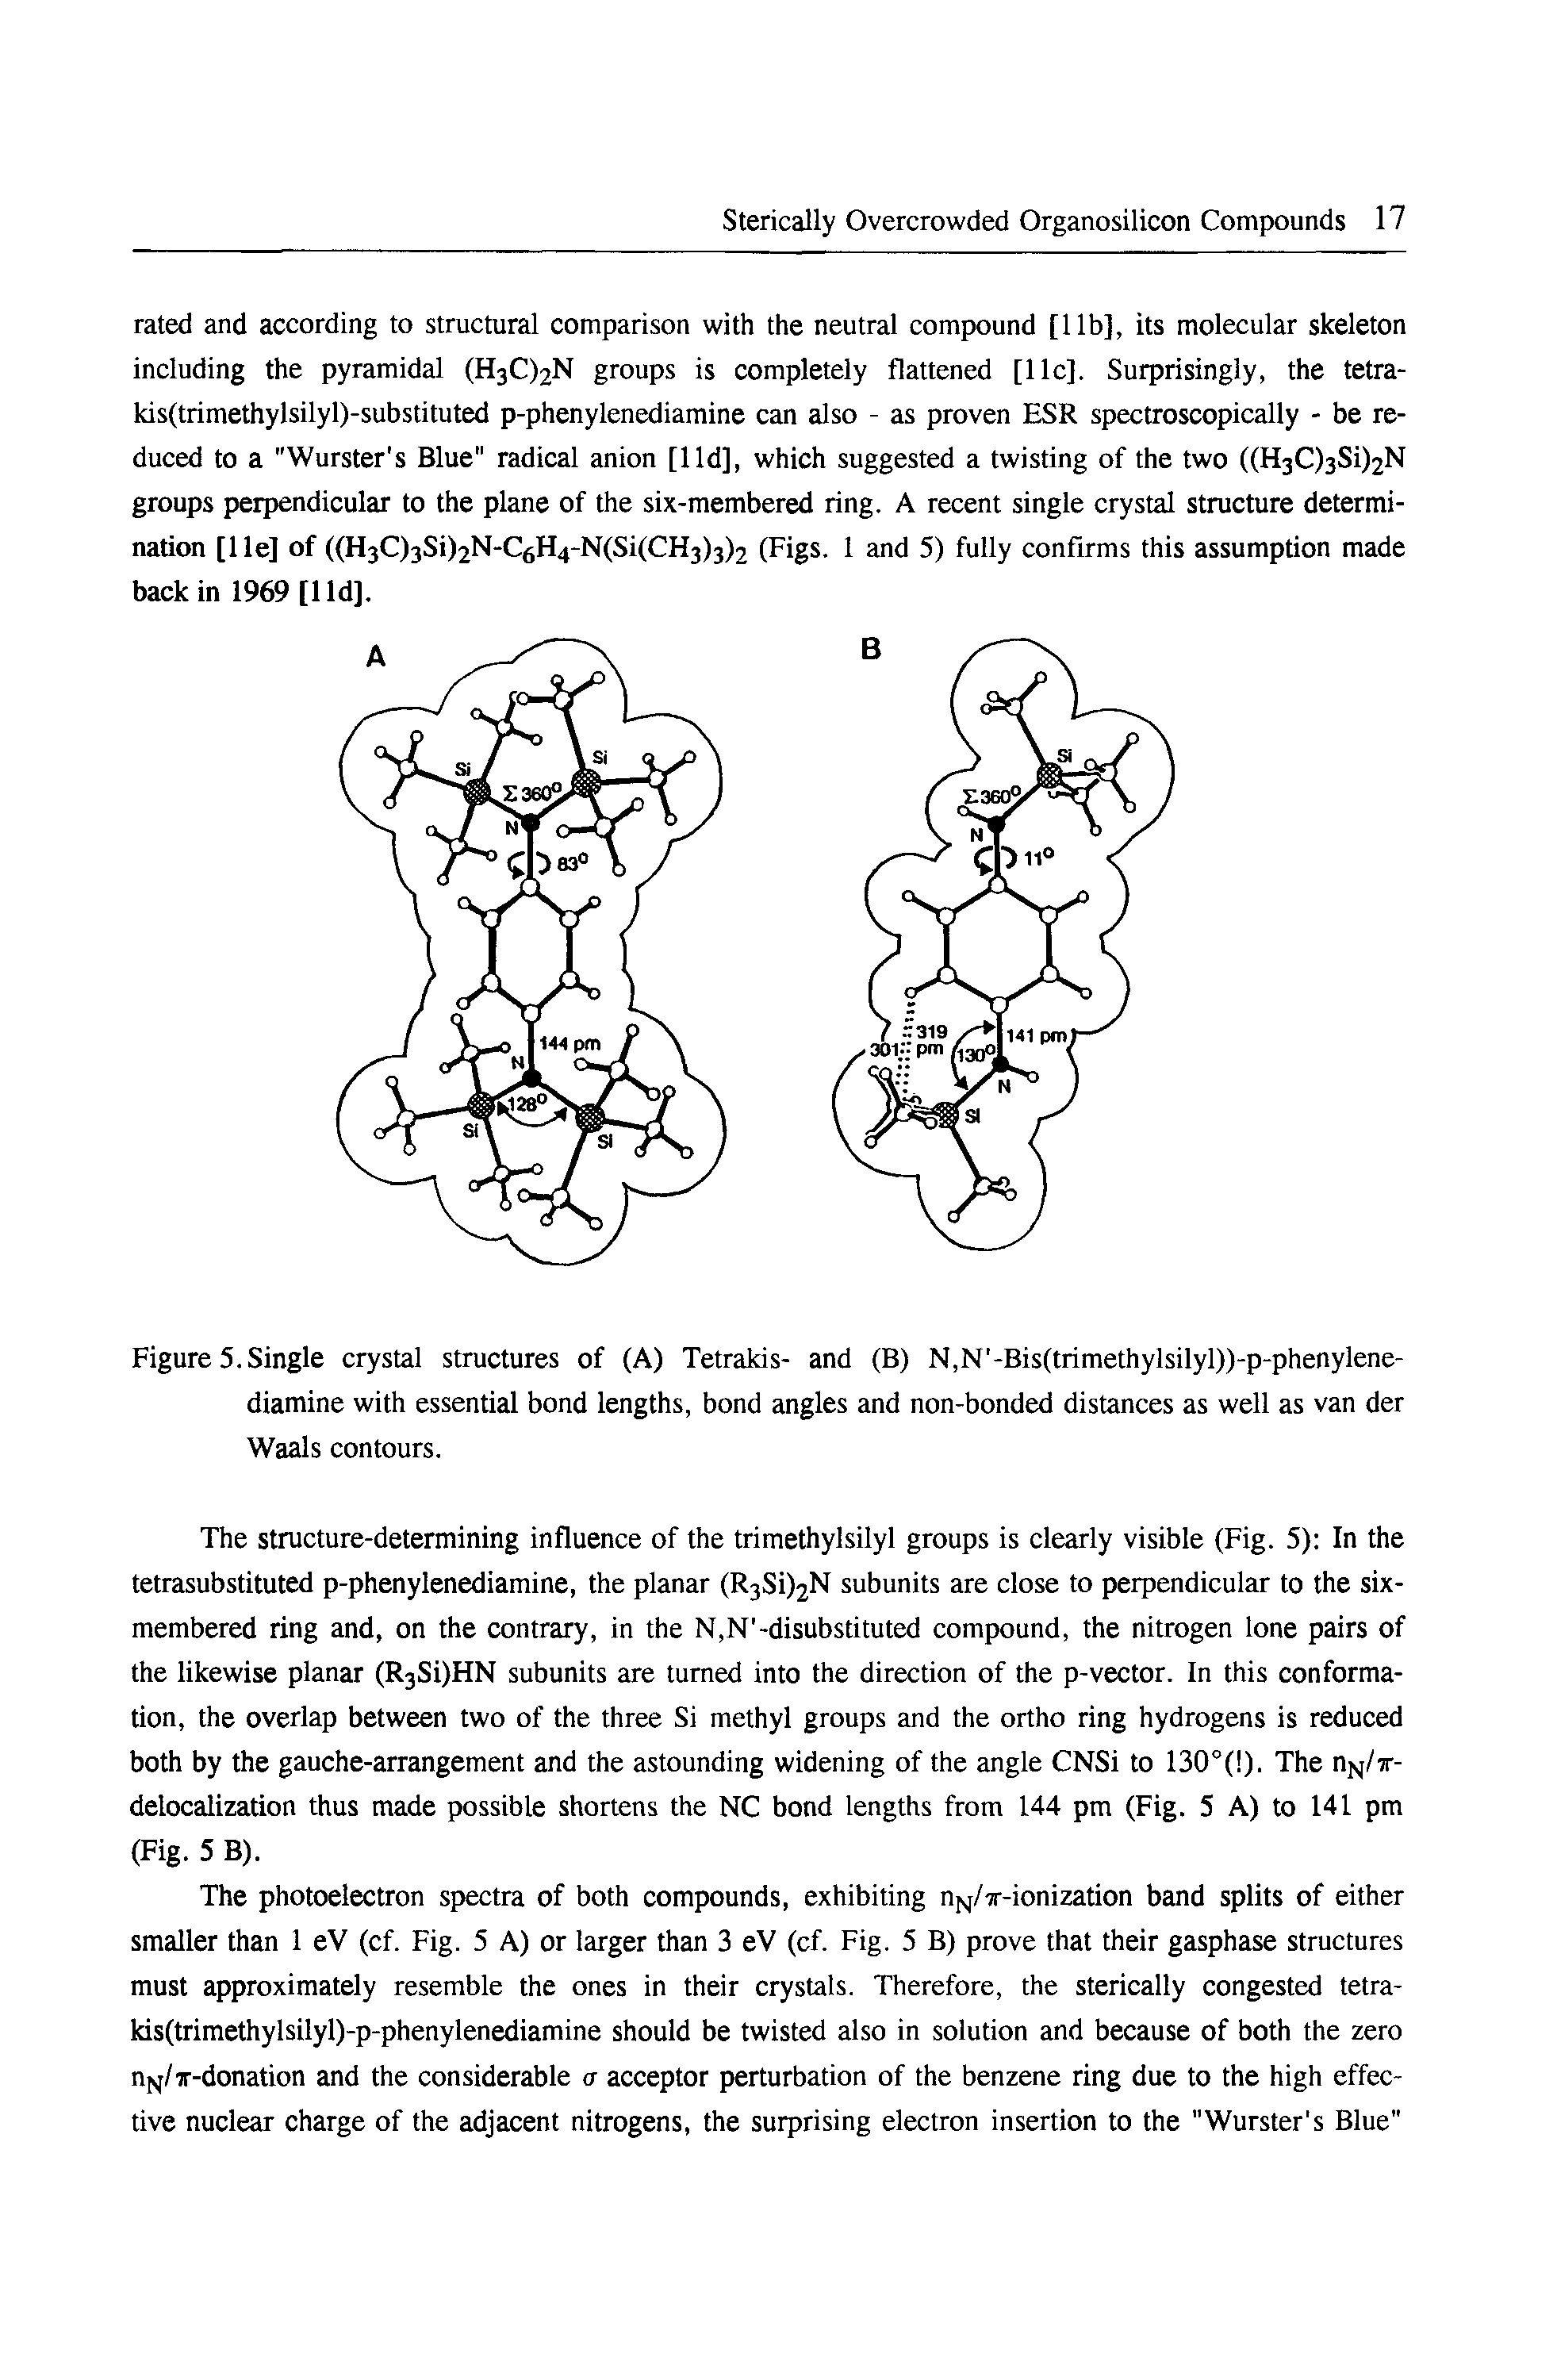 Figure 5. Single crystal structures of (A) Tetrakis- and (B) N,N -Bis(trimethylsilyl))-p-phenylene-diamine with essential bond lengths, bond angles and non-bonded distances as well as van der Waals contours.